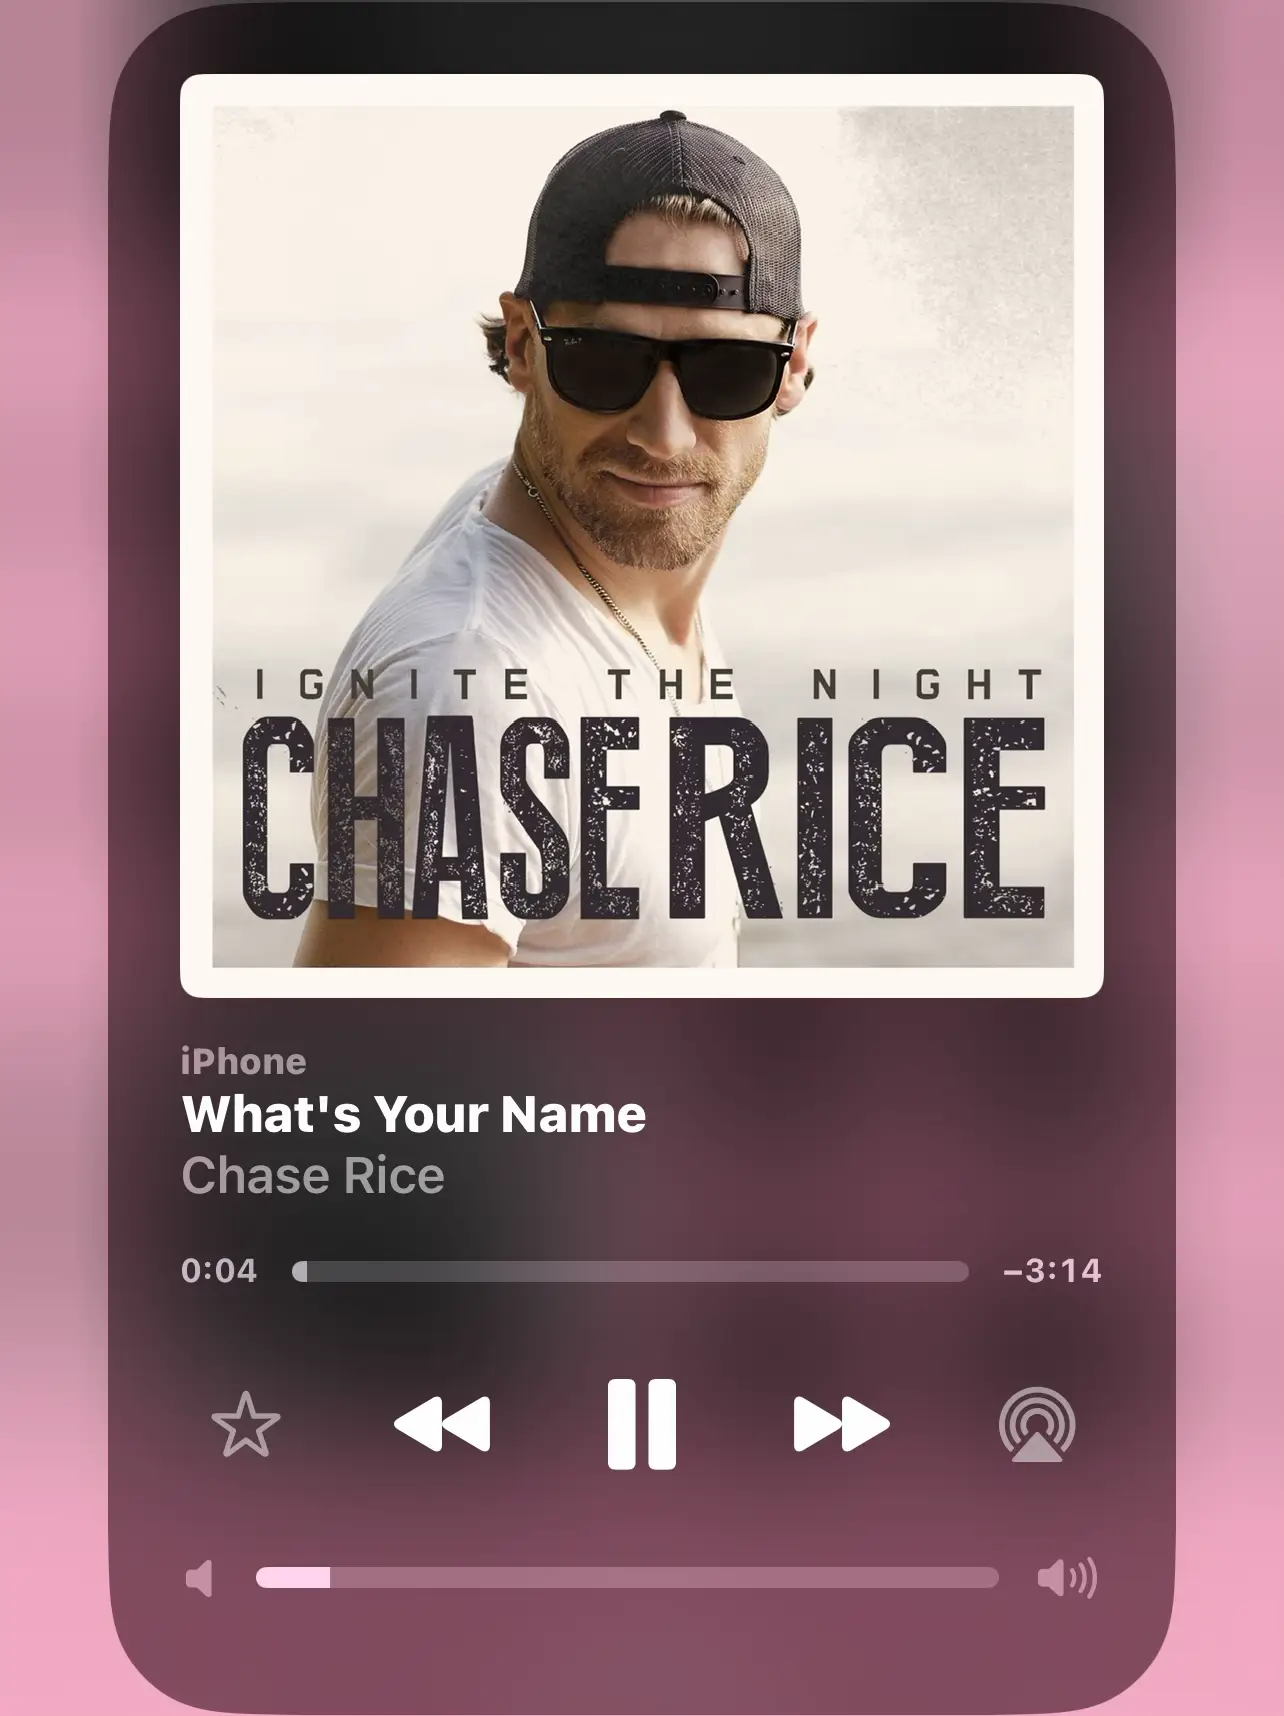  A music album cover for Chase Rice with the title "I Got The Night Chaser".